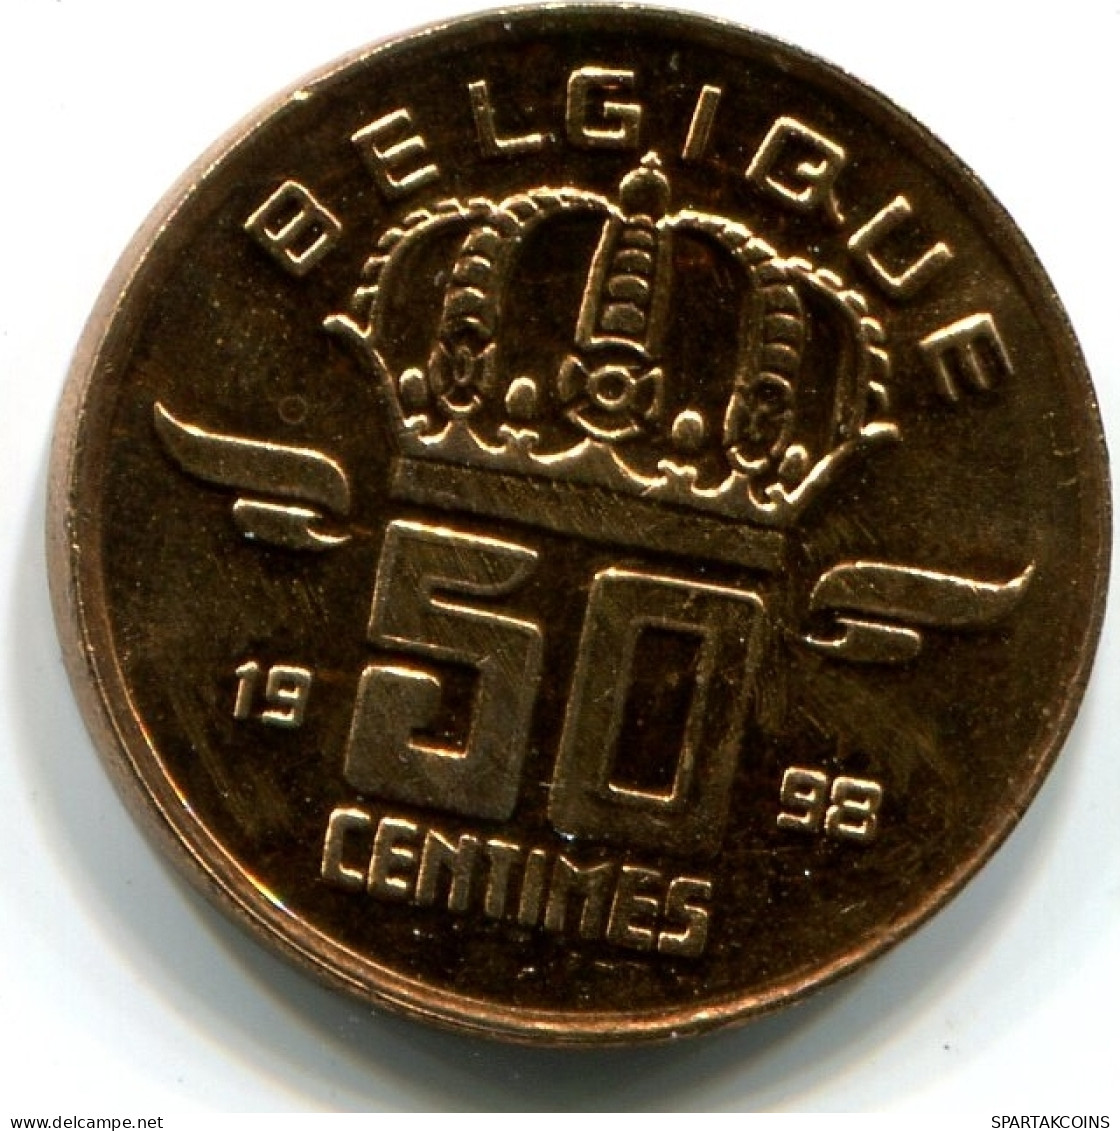 50 CENTIMES 1998 FRENCH Text BELGIUM Coin UNC #W10966.U - 50 Cents